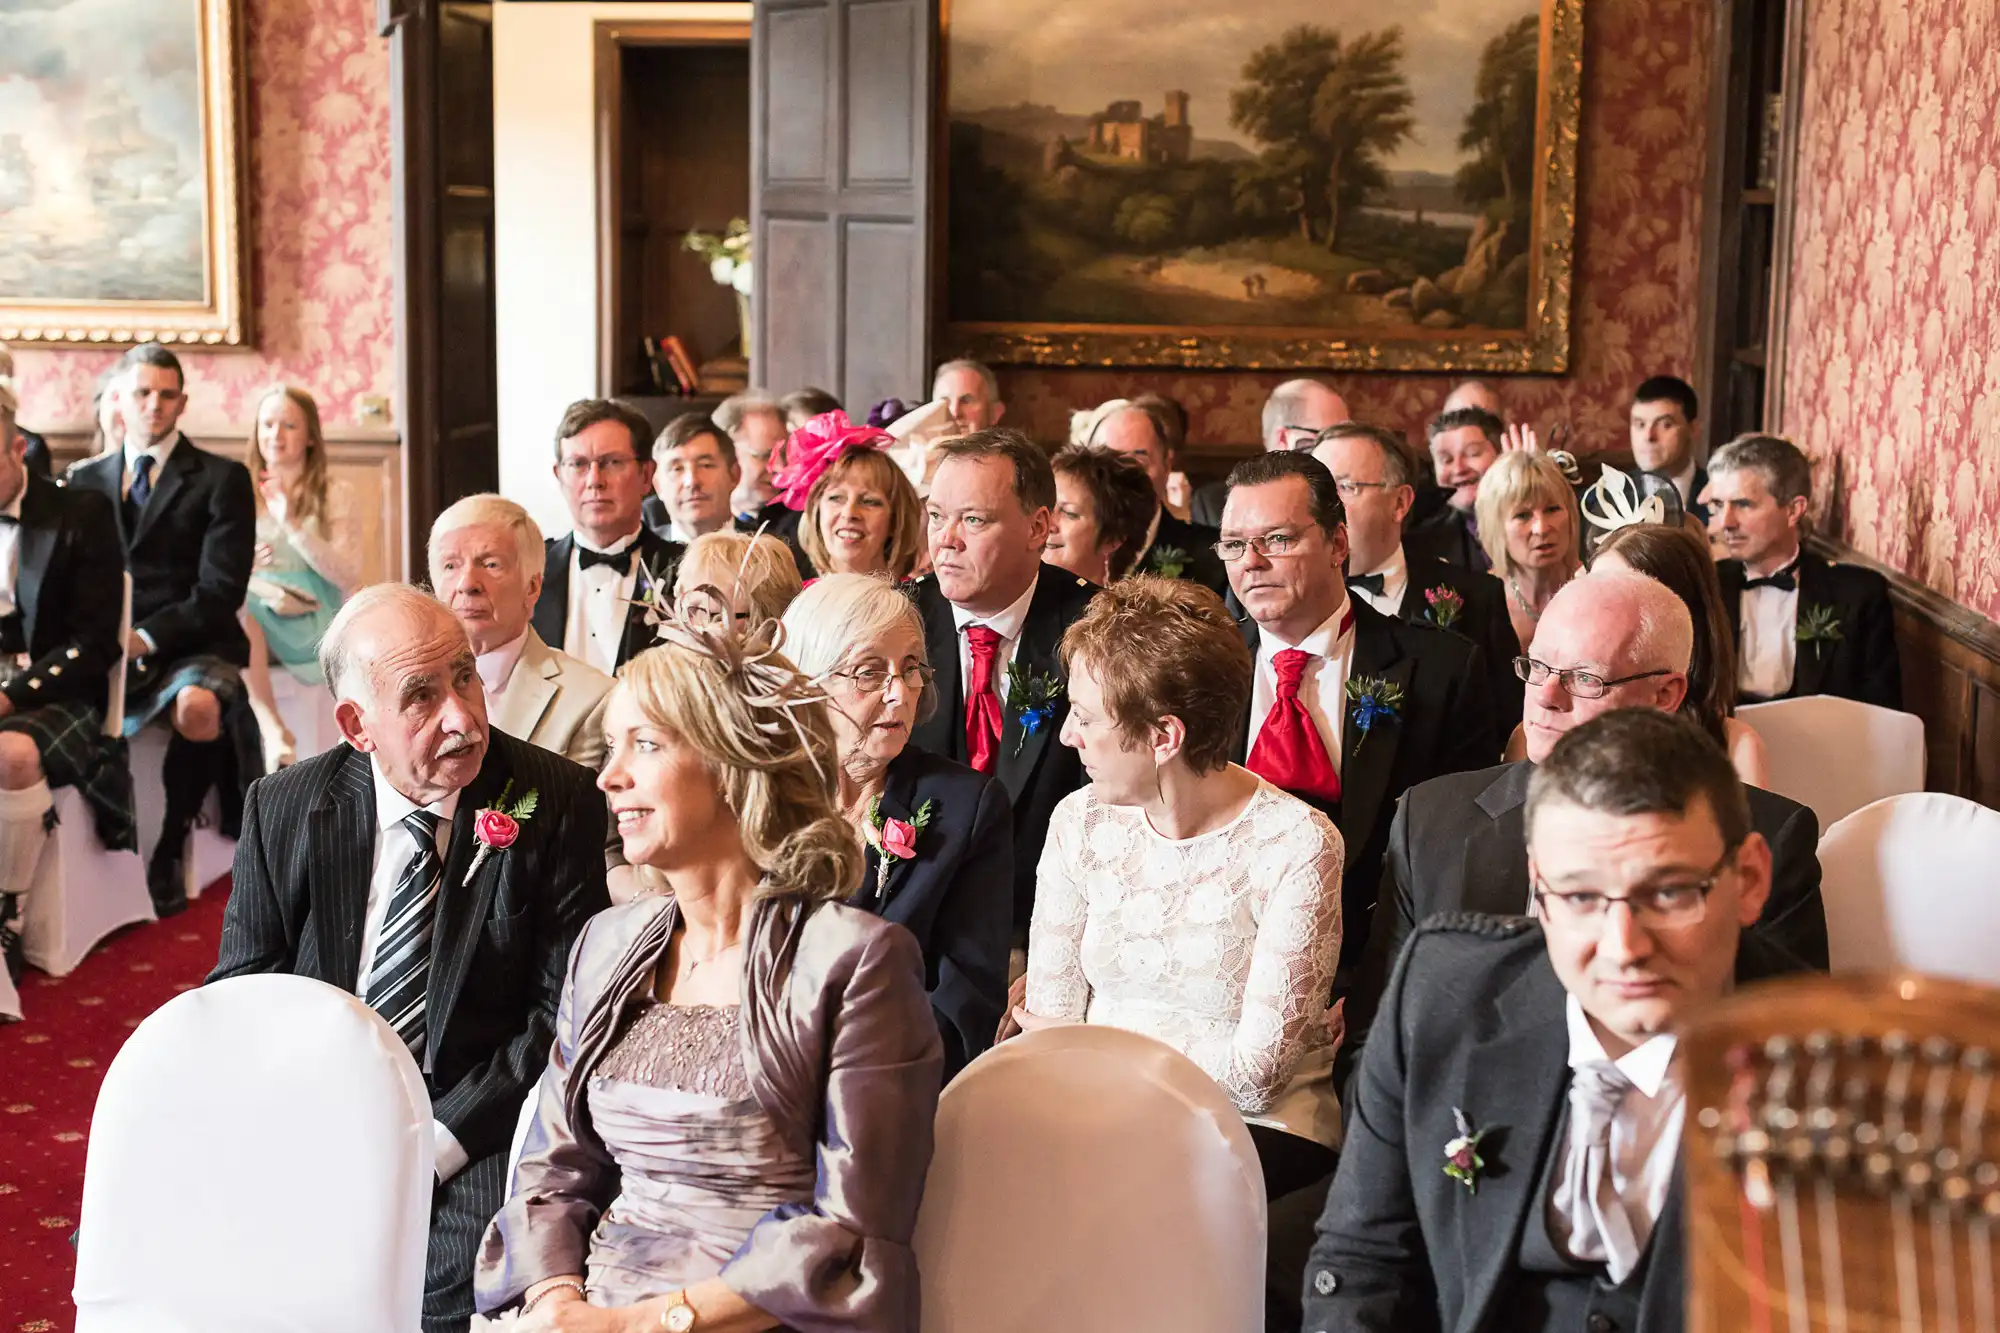 Guests seated at a wedding ceremony in an elegantly decorated room, attentively watching the proceedings.